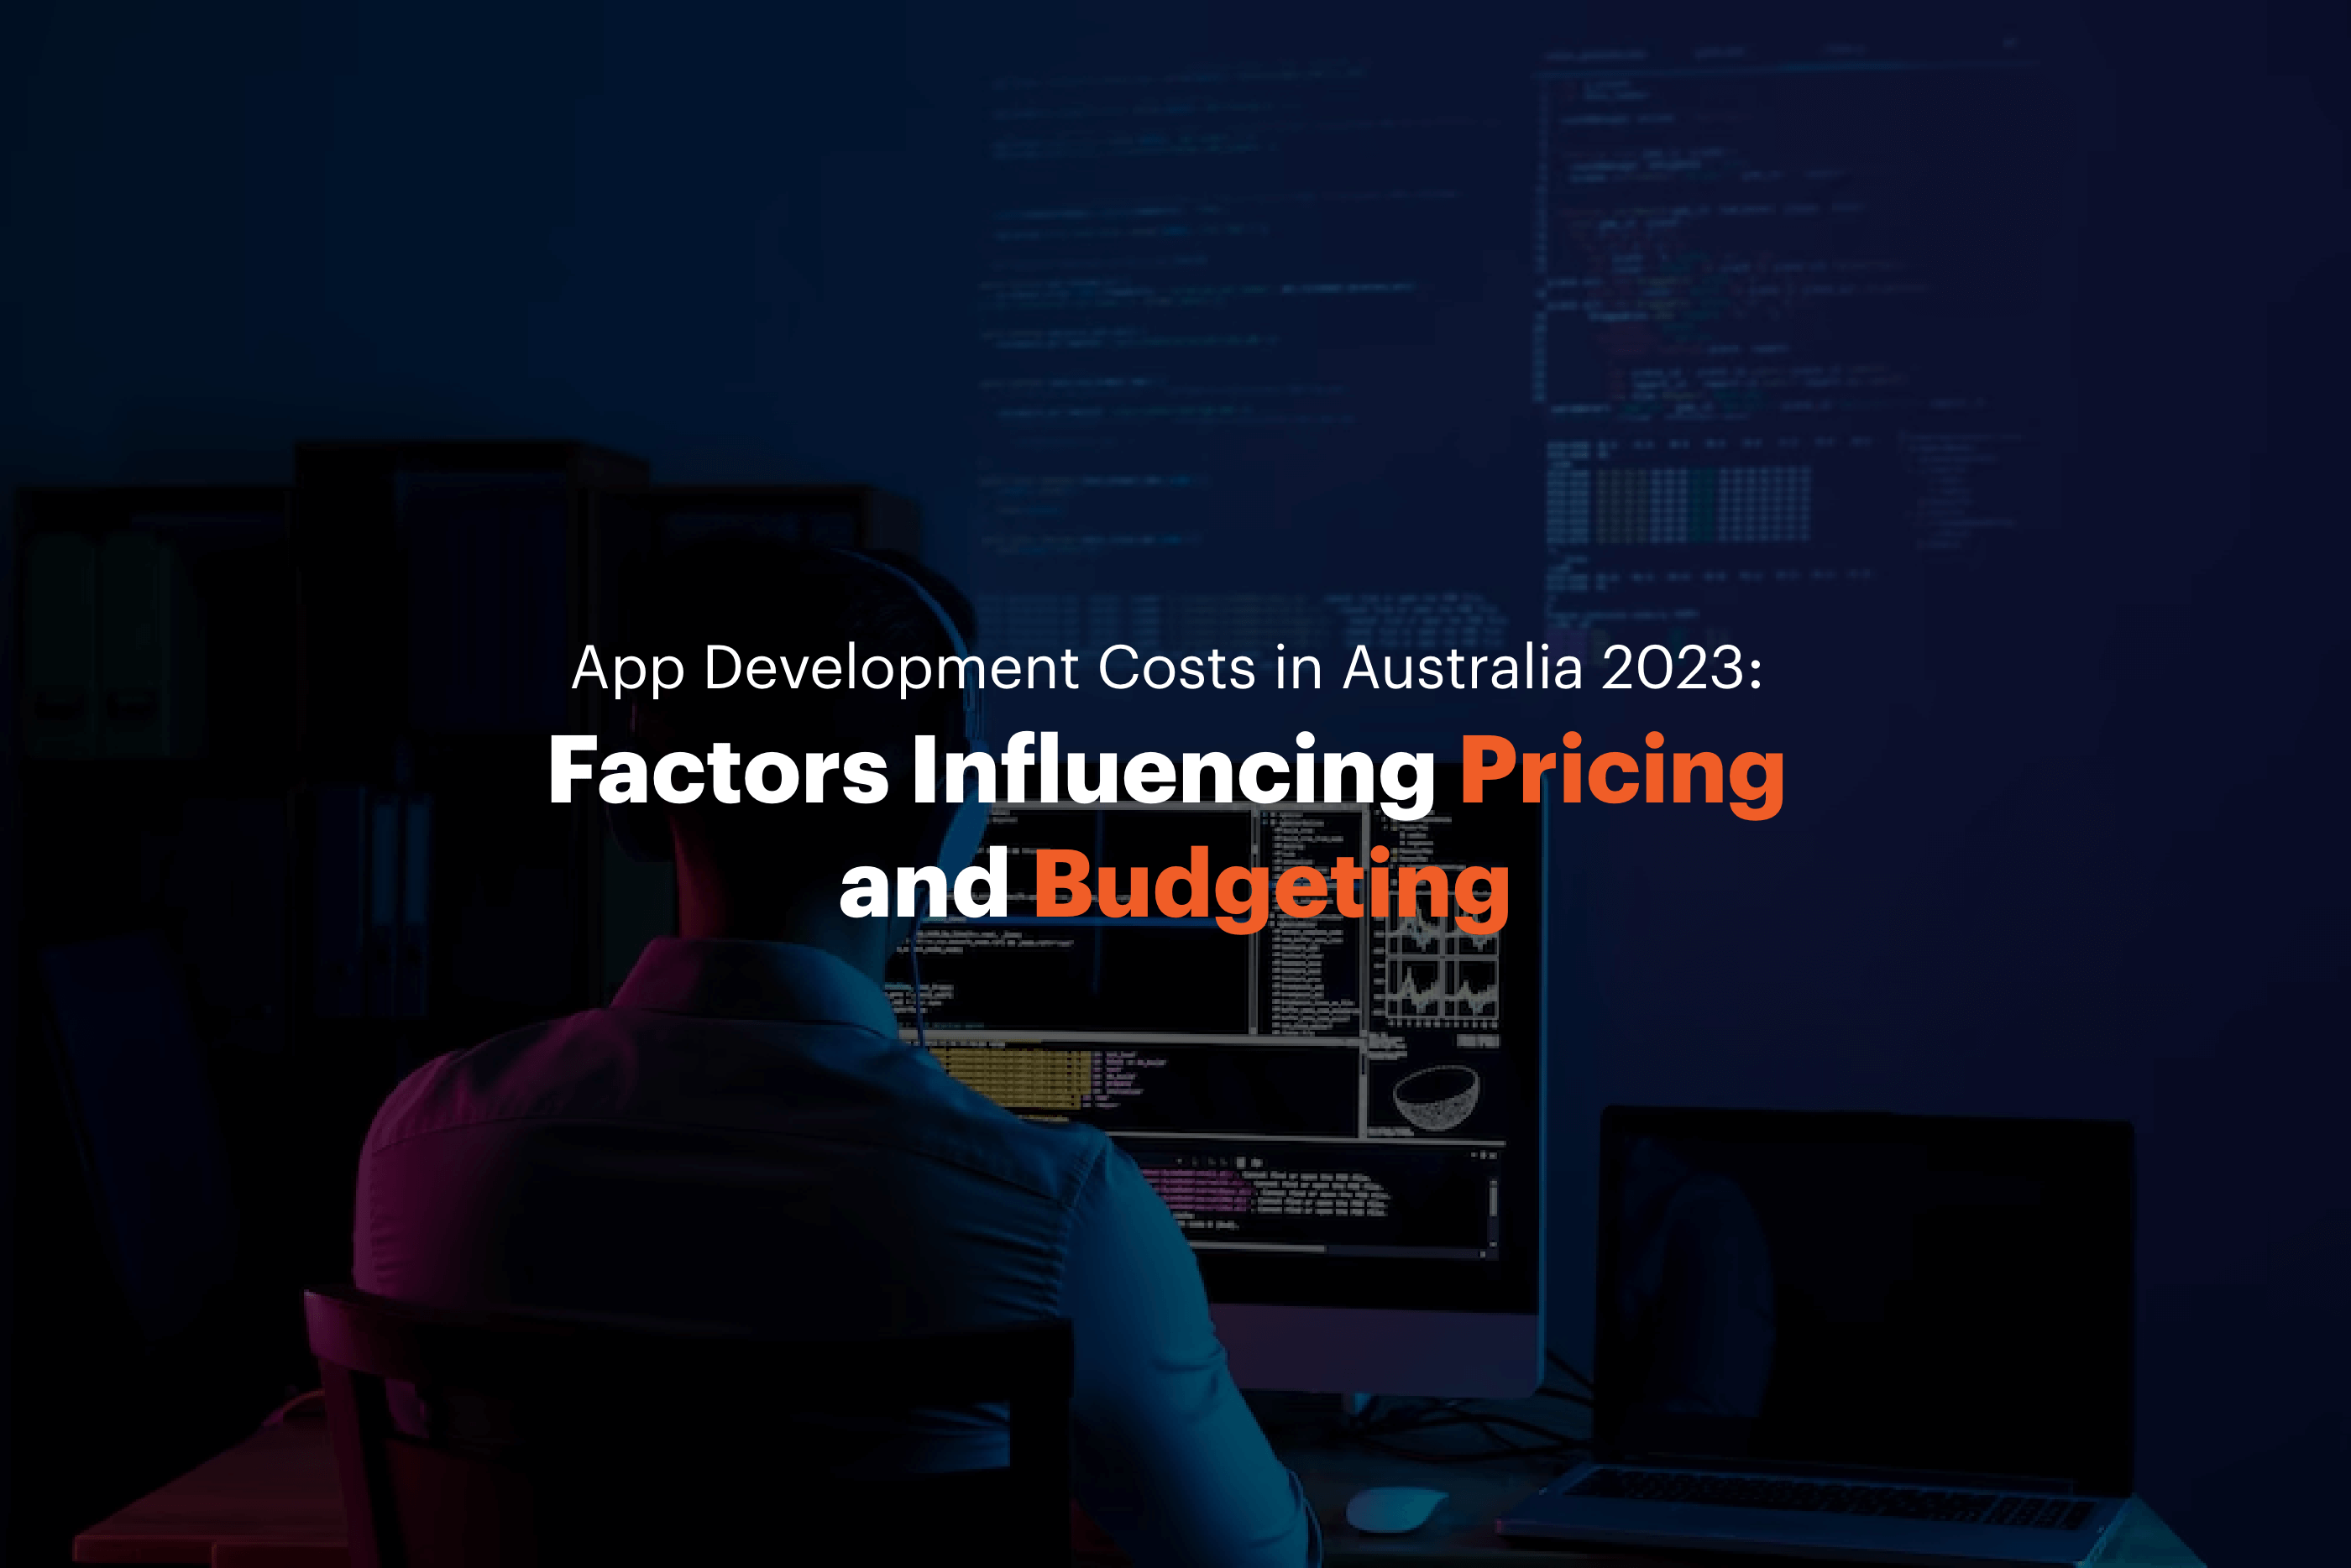 App Development Costs in Australia 2023: Factors Influencing Pricing and Budgeting